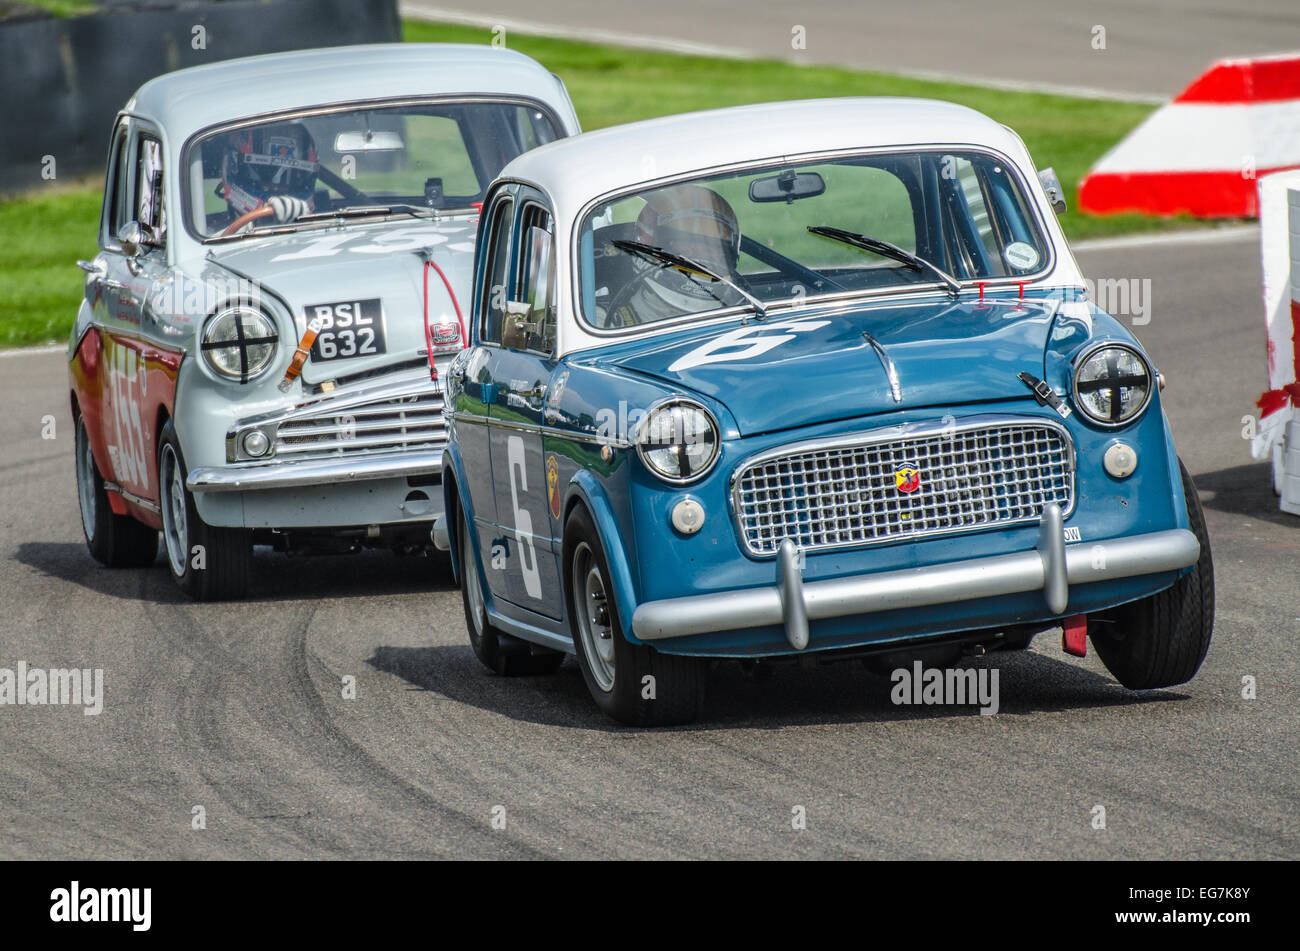 Fiat 1100 racing at the Goodwood Revival. Vintage motor car racing through the chicane with wheel off the ground Stock Photo